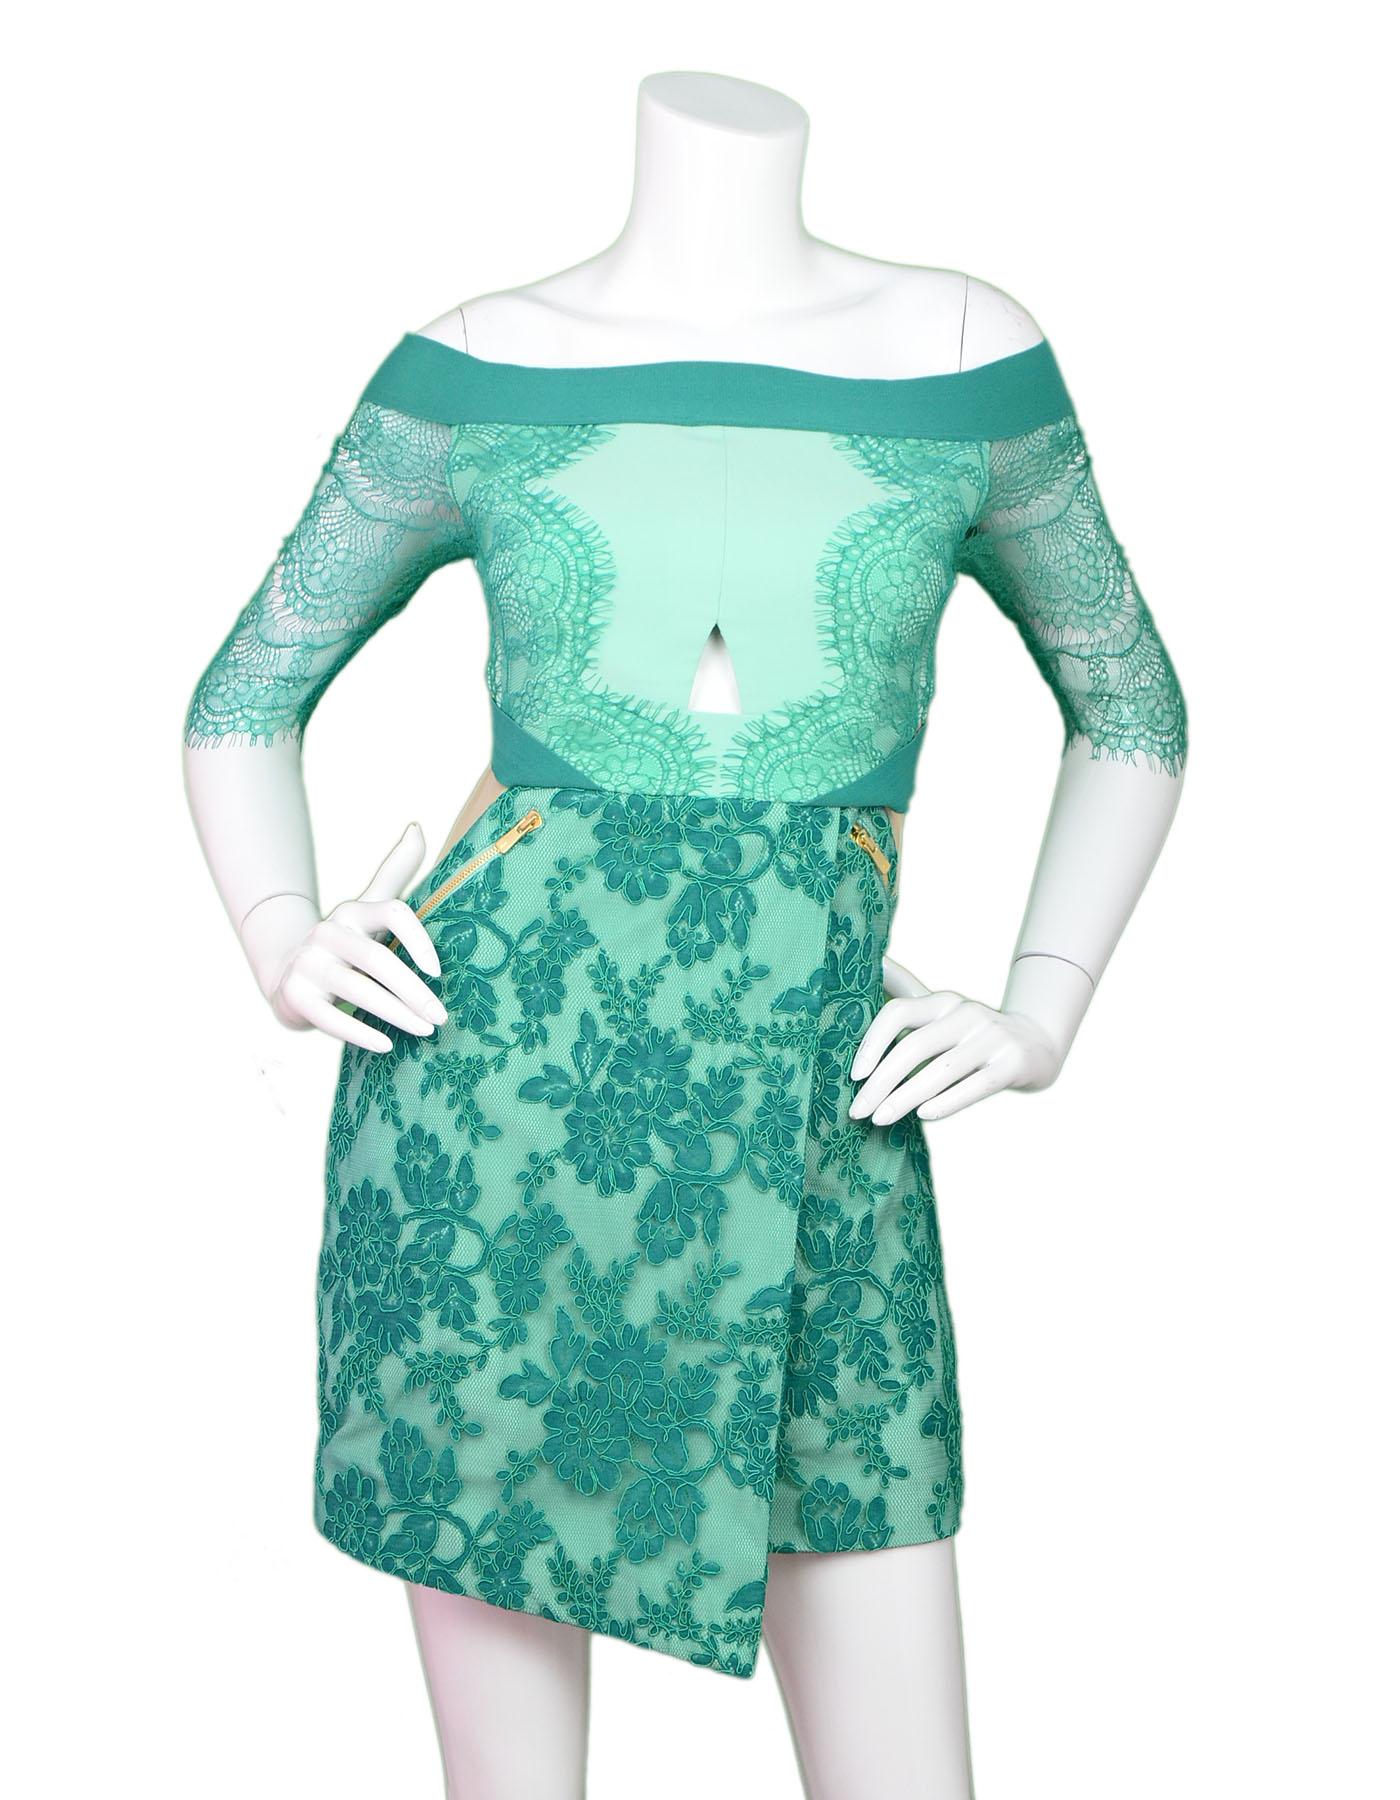 Three Floor Green Lace Dress Sz 6

Made In: China
Color: Green
Composition: 88% polyester, 12% elastane
Lining: Green 88% polyester, 12% elastane
Closure/Opening: Back zip closure
Exterior Pockets: Zip pockets at hips
Interior Pockets: None
Overall